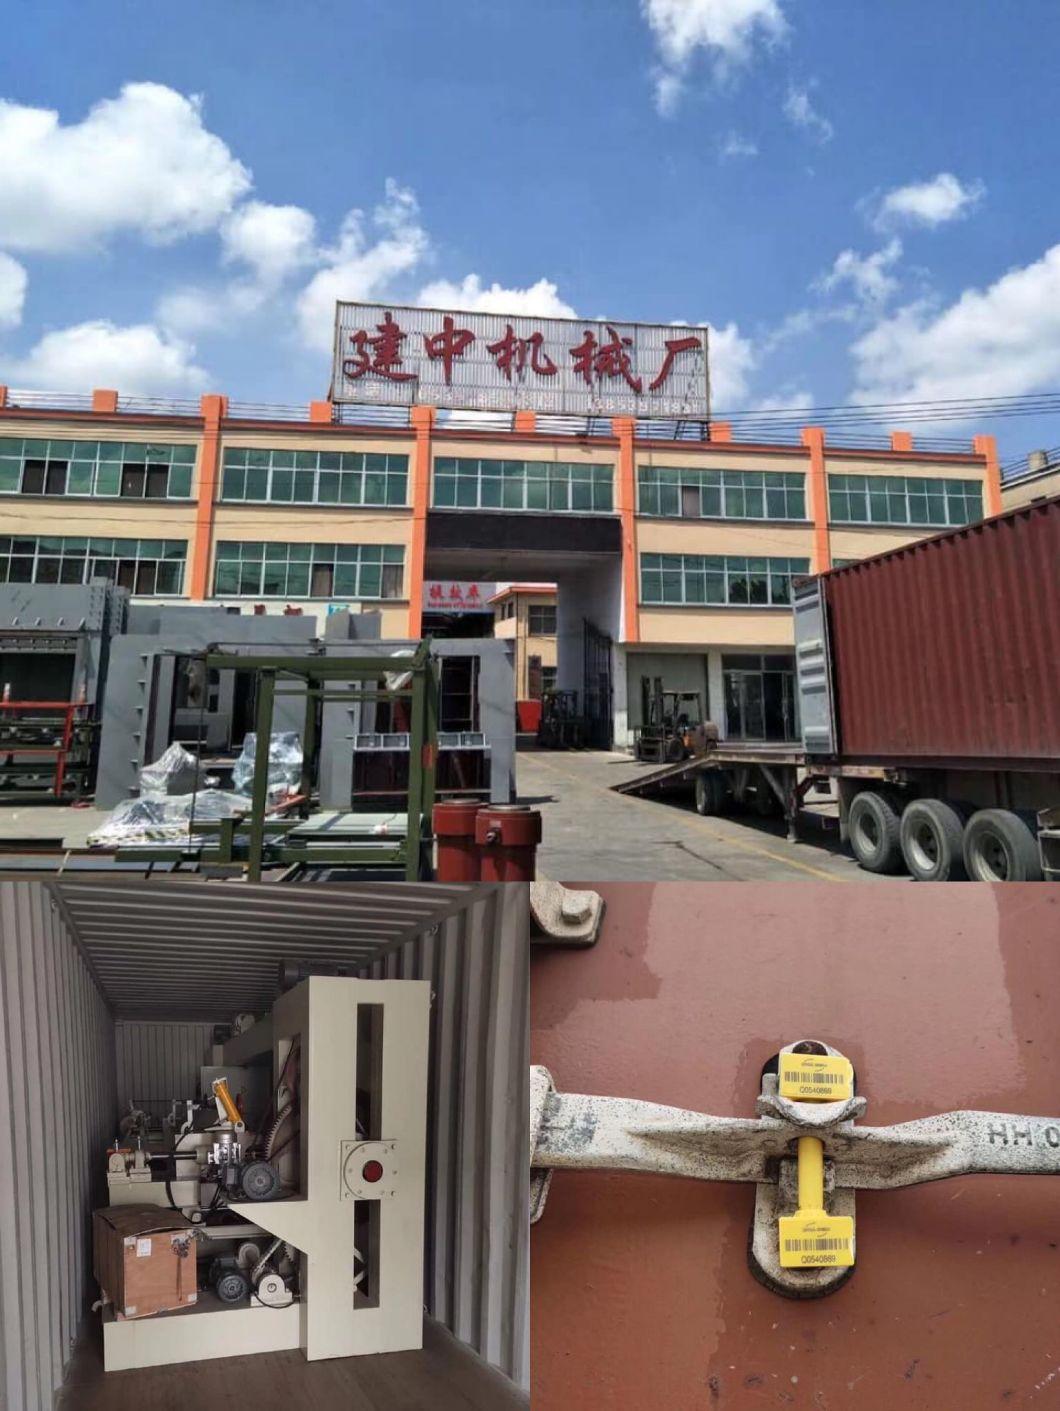 Veneer Sawing Cutting Machinery/Specialized Veneer Machinery Producer/Saw Cutting Machhinery for Plywood Making/Ideal Price Machinery